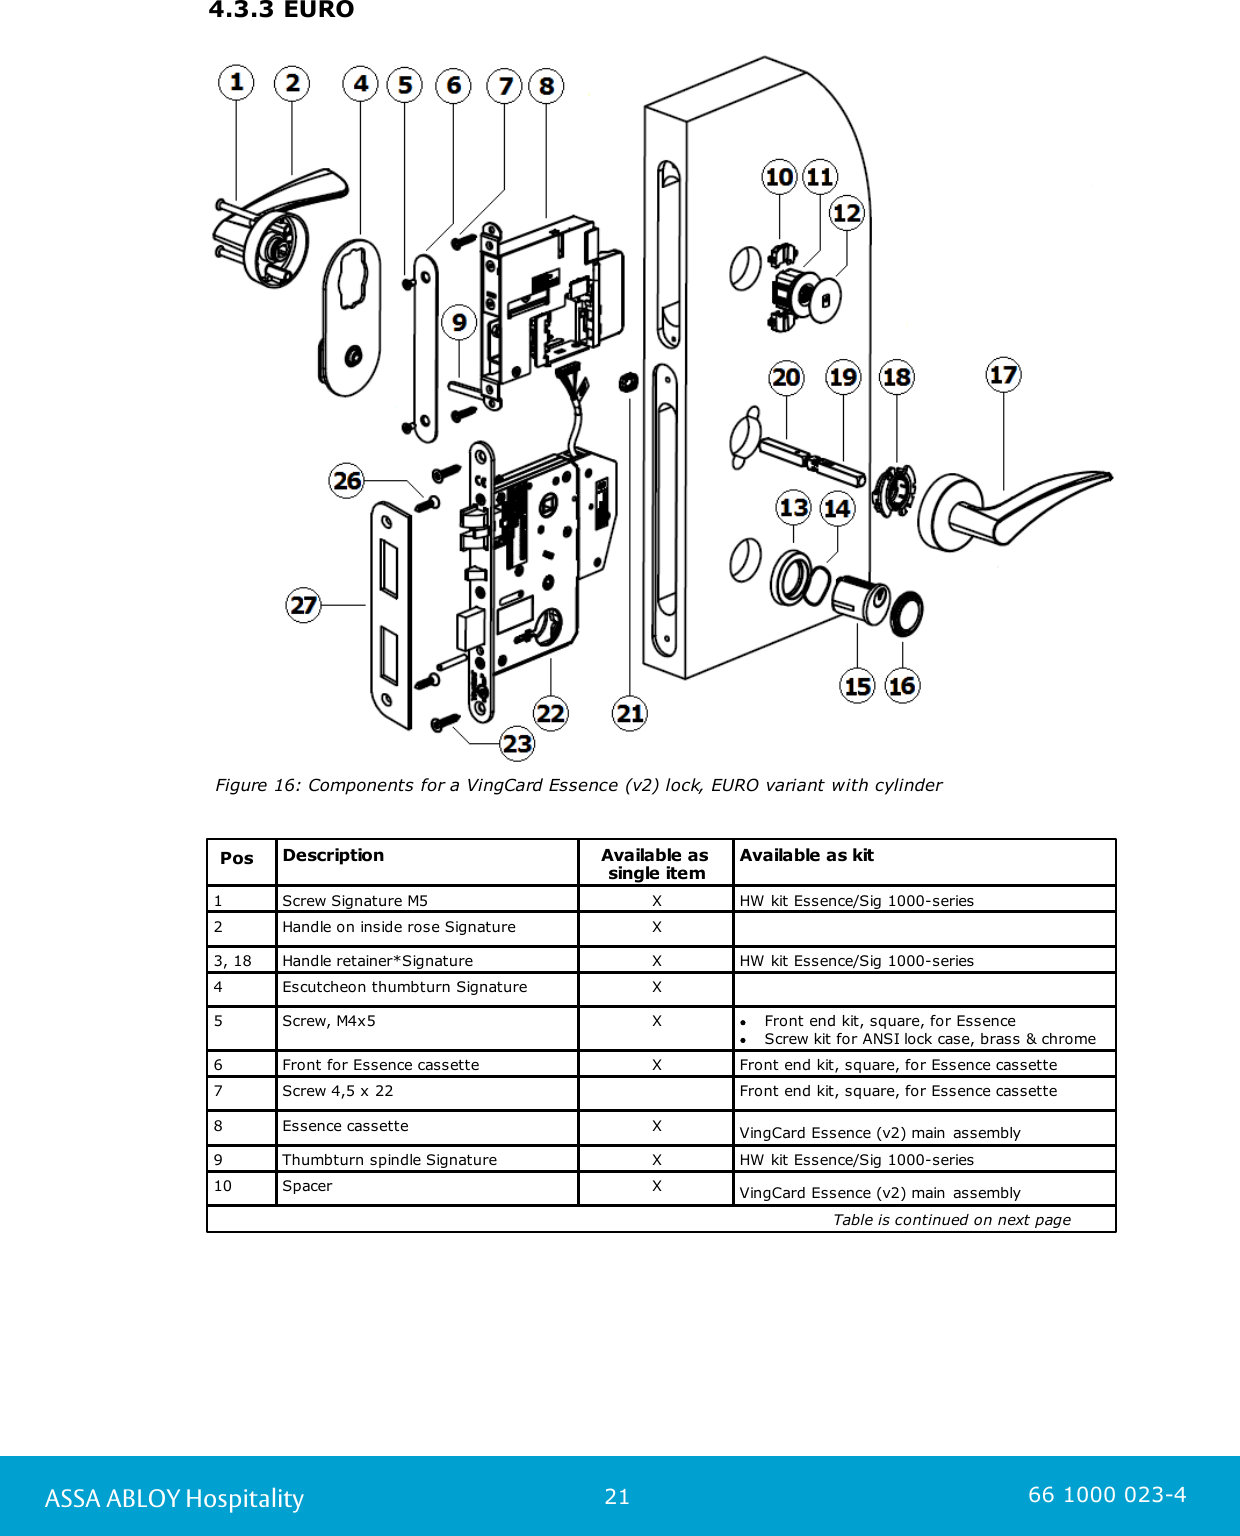 21ASSA ABLOY Hospitality 66 1000 023-44.3.3 EURO Figure 16: Components for a VingCard Essence (v2) lock, EURO variant with cylinder  PosDescriptionAvailable as single itemAvailable as kit1Screw Signature M5 XHW kit Essence/Sig 1000-series2Handle on inside rose Signature X3, 18Handle retainer*Signature XHW kit Essence/Sig 1000-series4Escutcheon thumbturn SignatureX5Screw, M4x5XFront end kit, square, for Essence Screw kit for ANSI lock case, brass &amp; chrome6Front for Essence cassetteXFront end kit, square, for Essence cassette7Screw 4,5 x 22Front end kit, square, for Essence cassette8Essence cassette XVingCard Essence (v2) main assembly9Thumbturn spindle SignatureXHW kit Essence/Sig 1000-series10SpacerXVingCard Essence (v2) main assembly                                                                                                                       Table is continued on next page